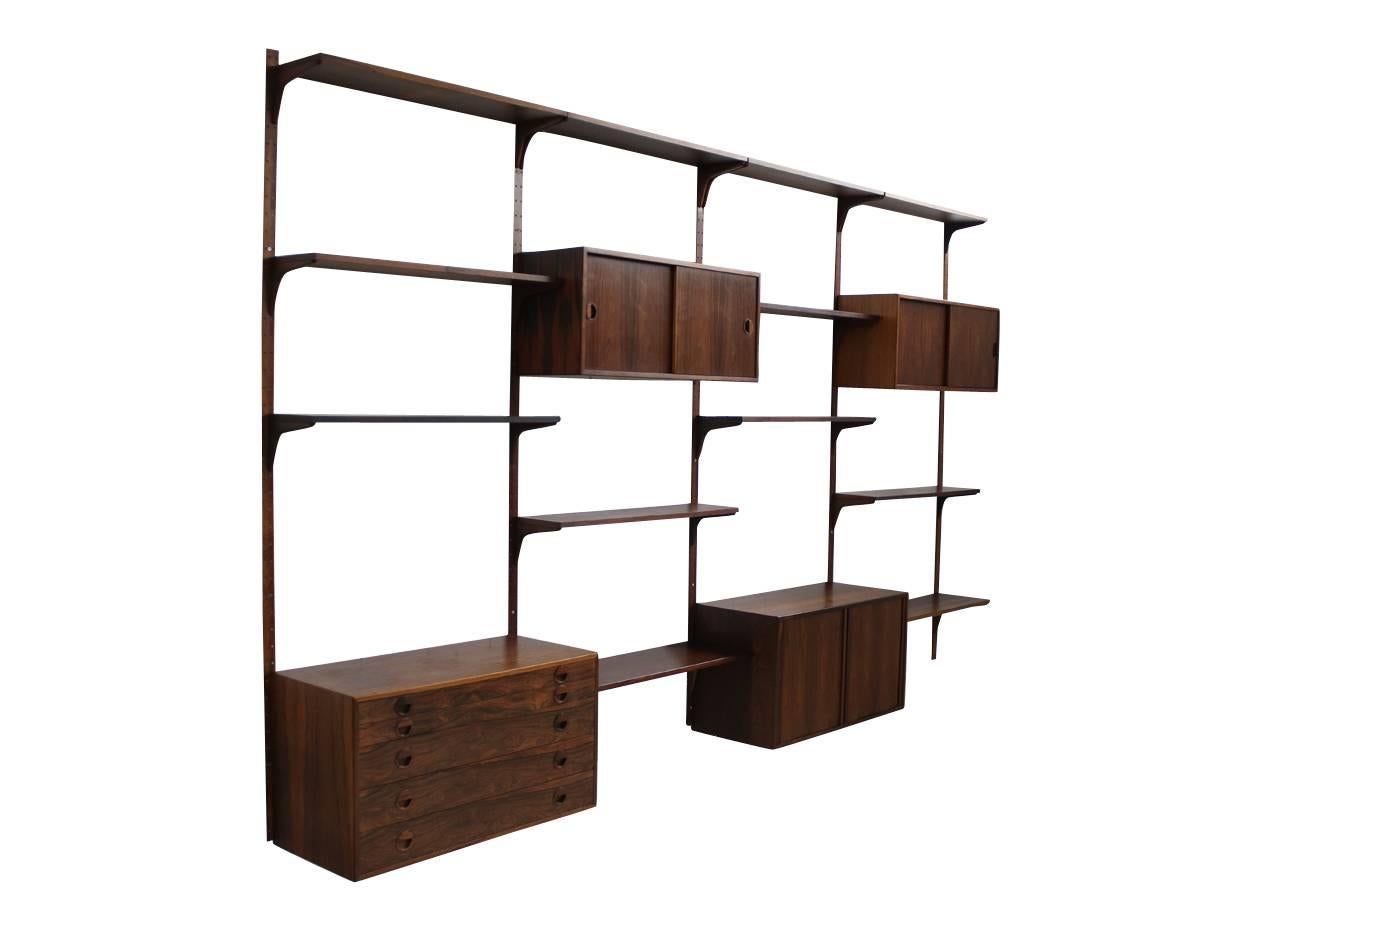 Large Danish 1960s Rosewood Wall Unit by Rud Thygesen for HG Møbler Shelf 3